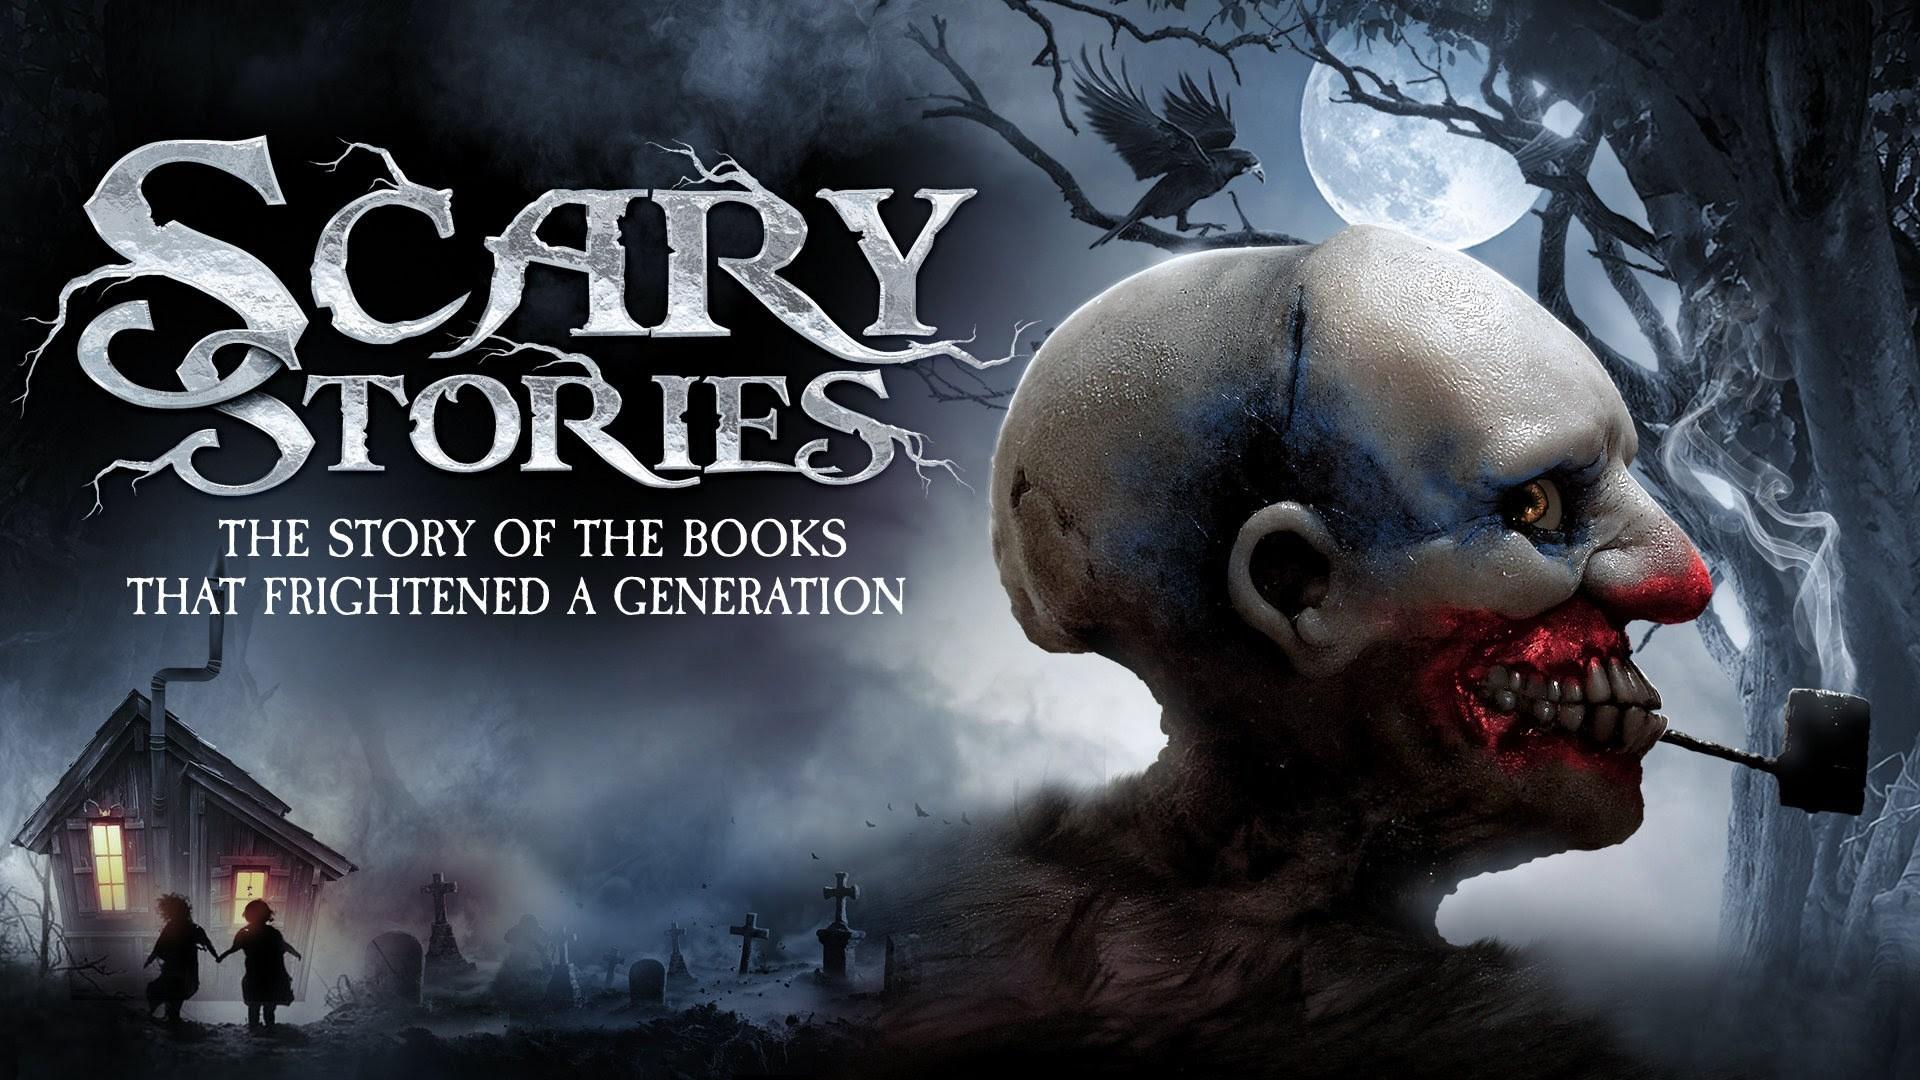 Scary Stories To Tell In The Dark Wallpapers - Wallpaper Cave